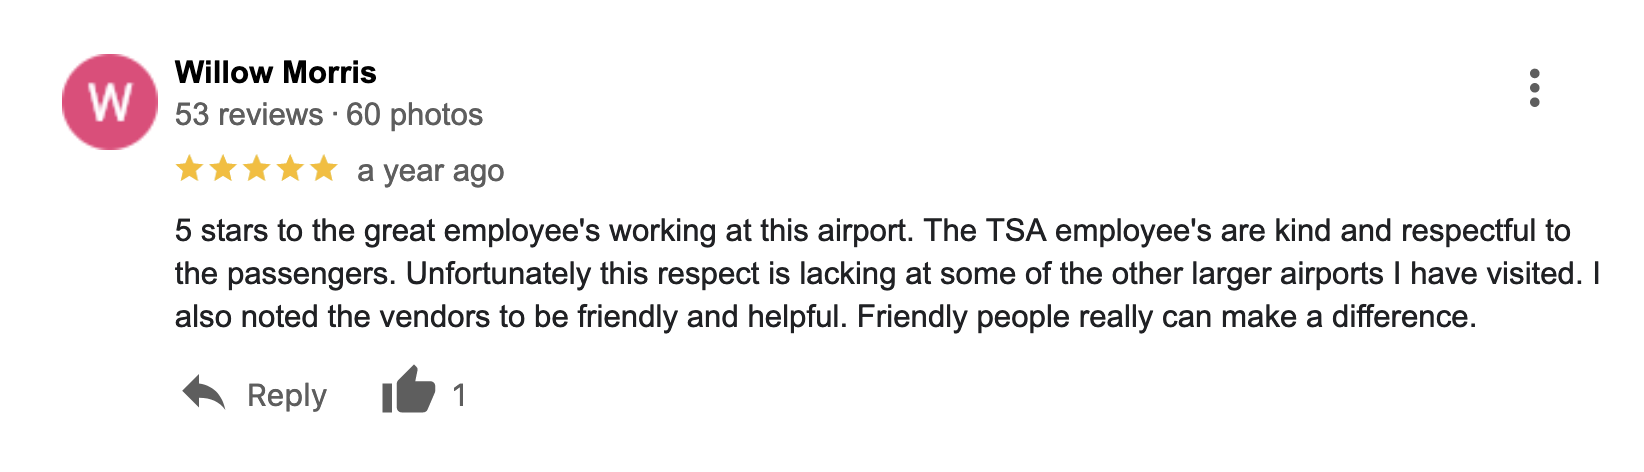 Image of airport review in which the reviewer says that friendly people make a huge difference.